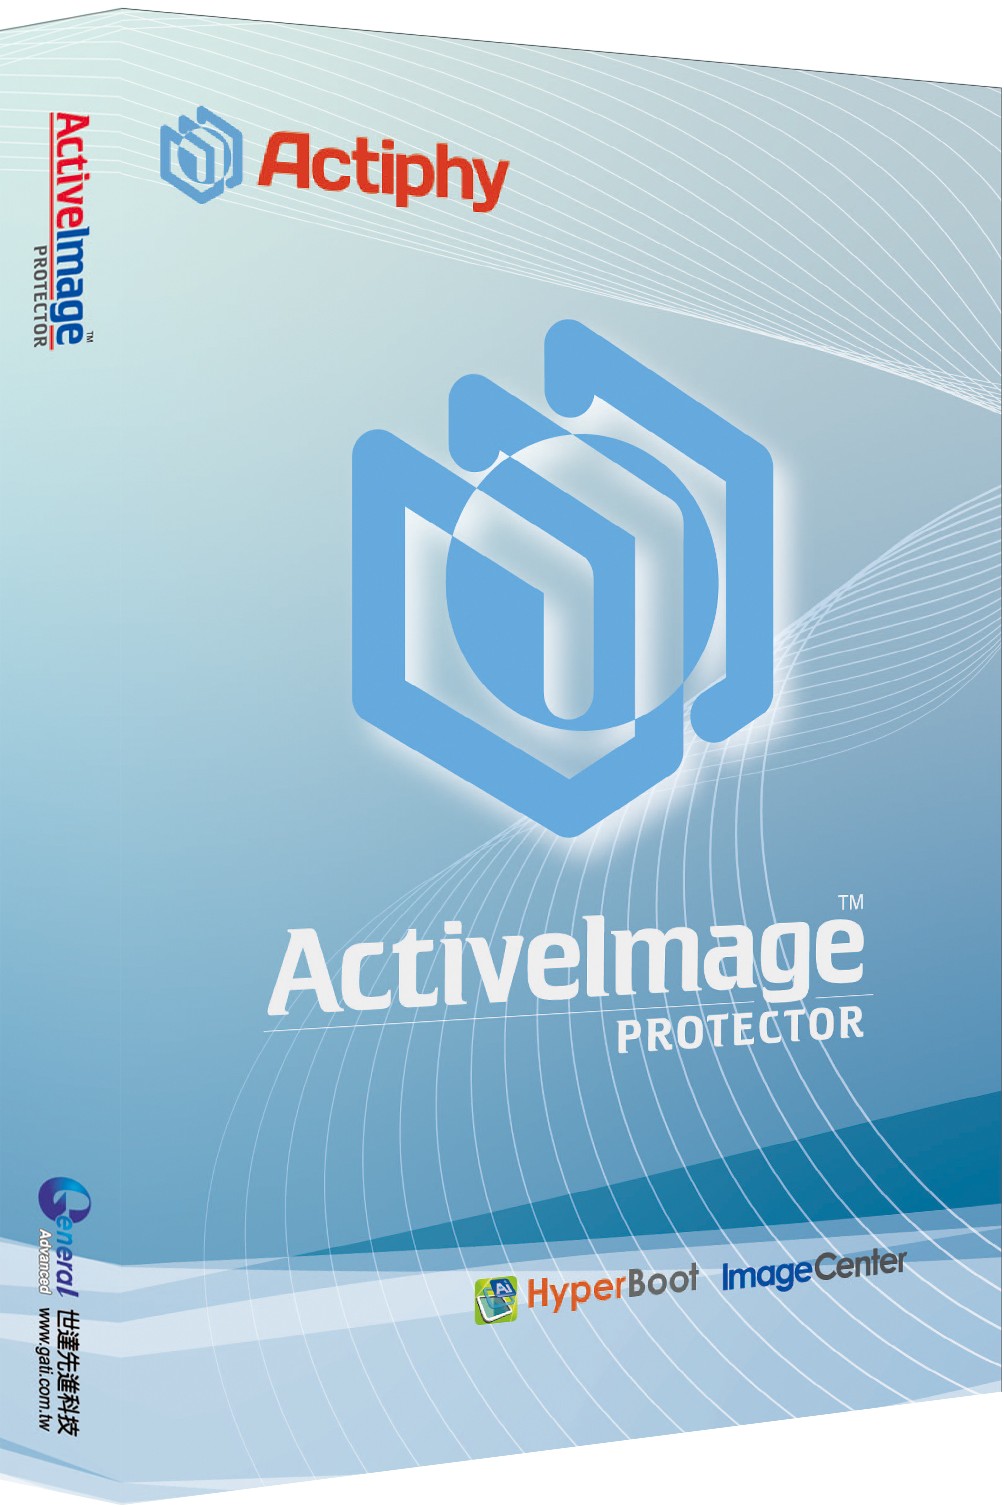 Actiphy ActiveImage Protector 2022 簡易操作手冊